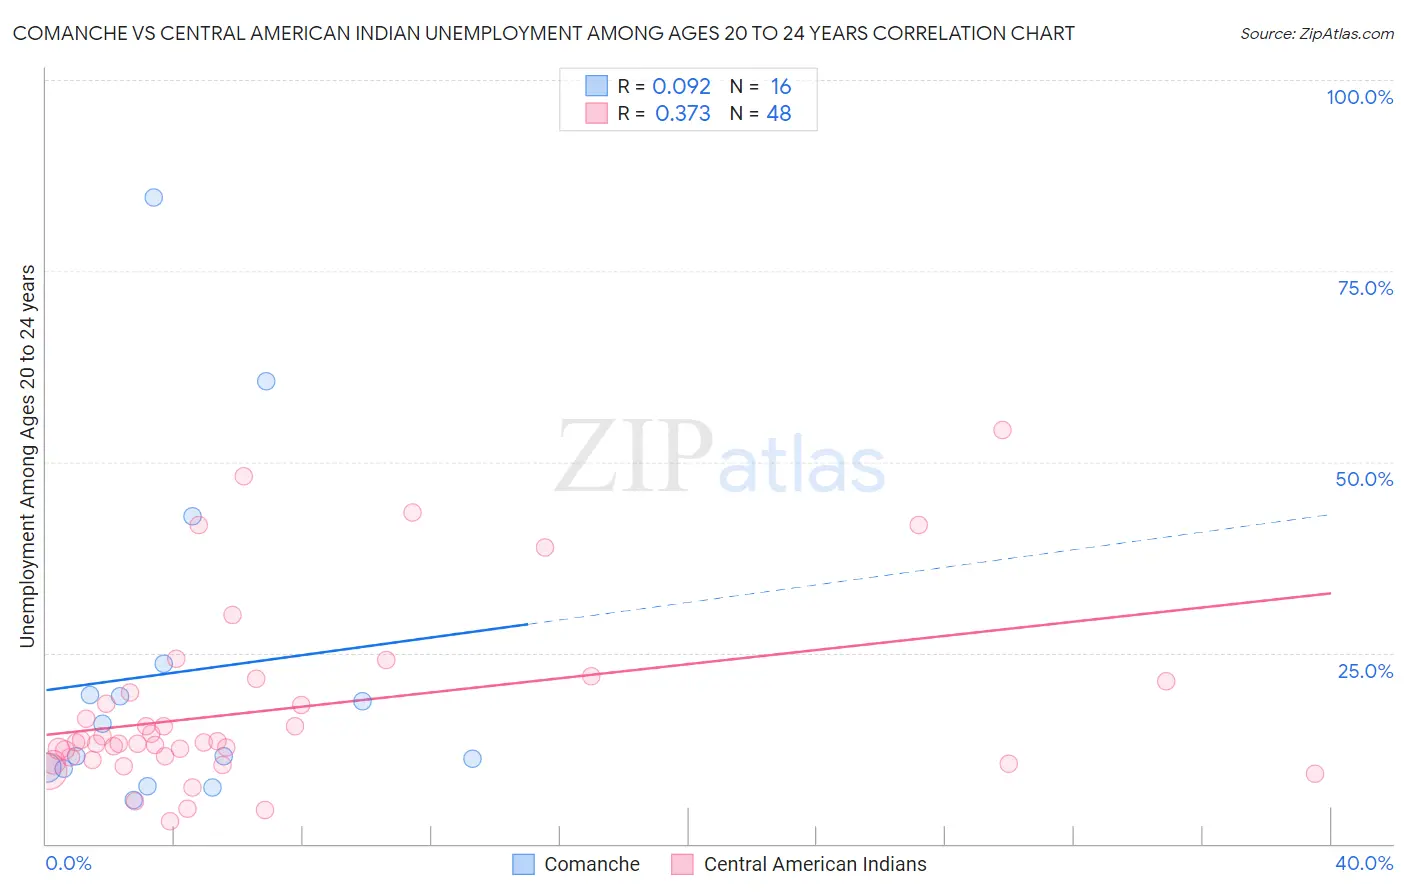 Comanche vs Central American Indian Unemployment Among Ages 20 to 24 years